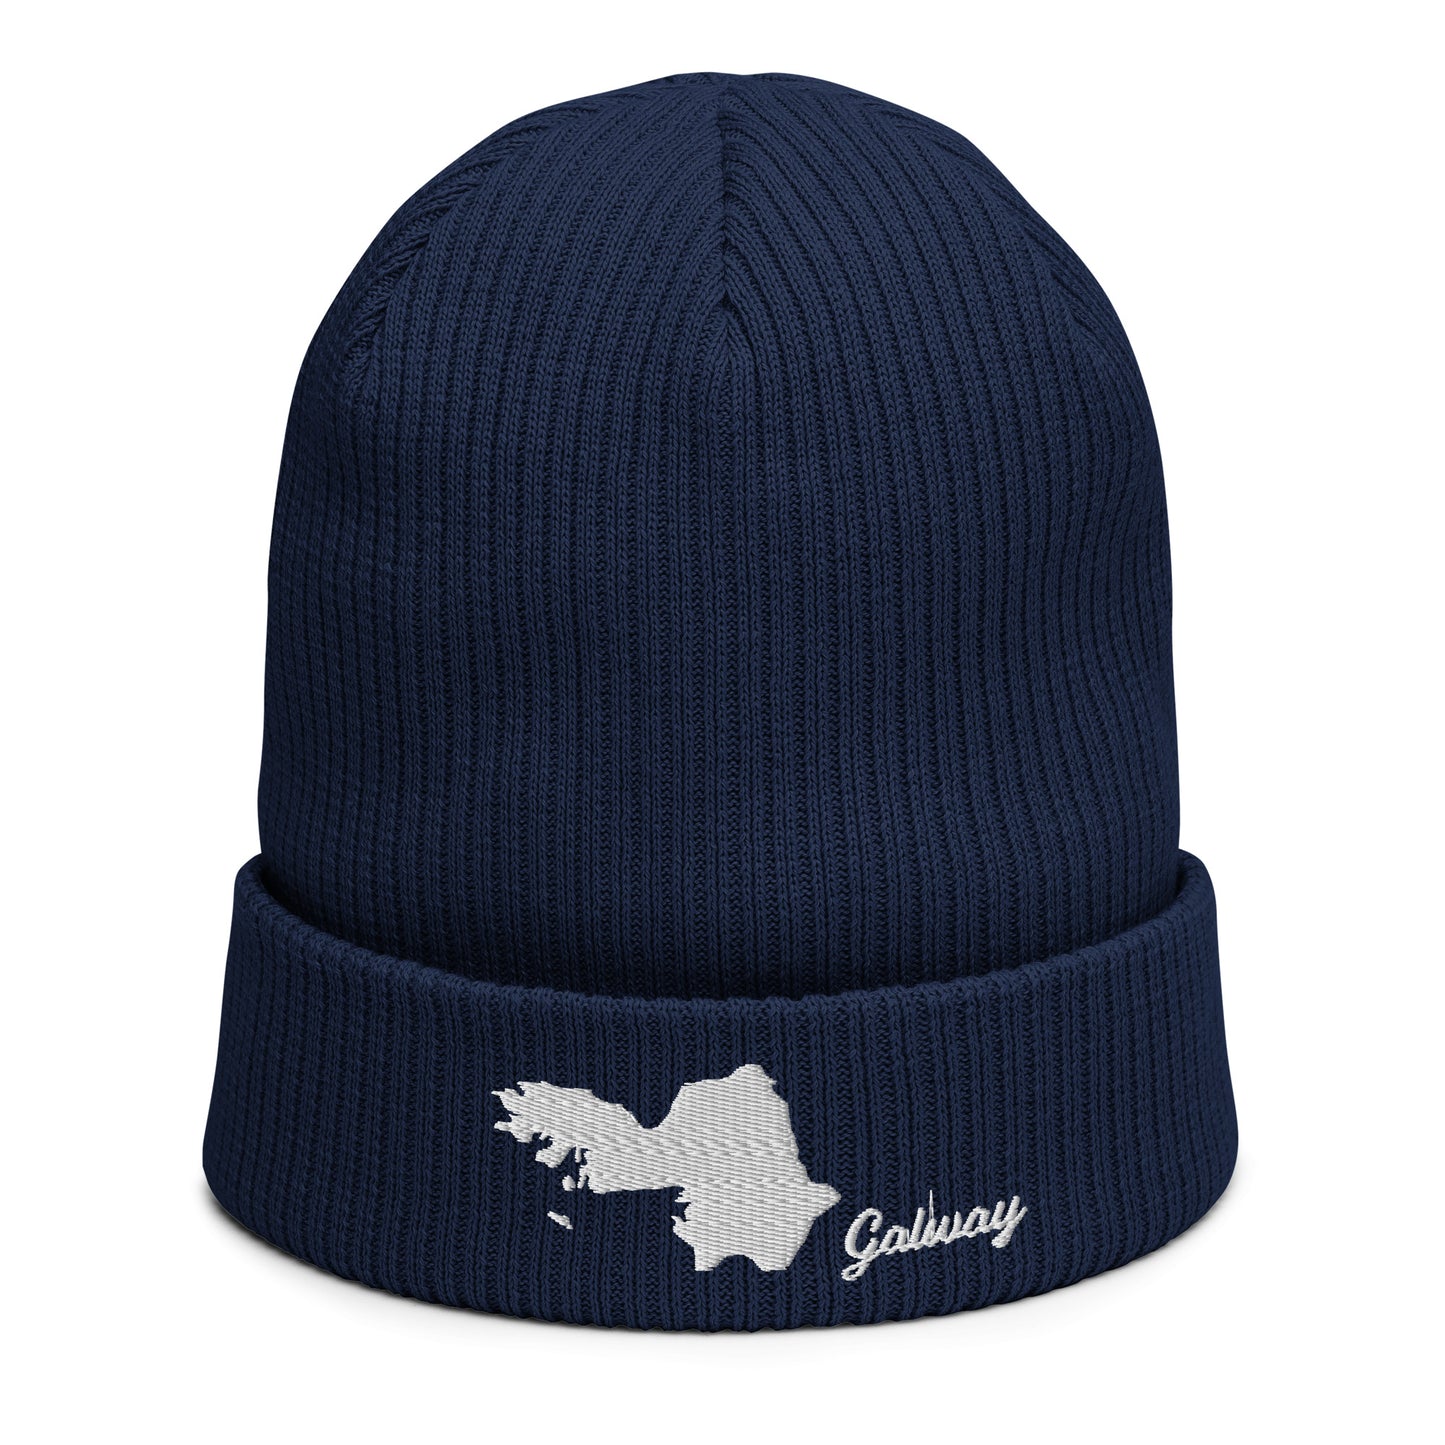 Organic County Galway Ribbed Beanie